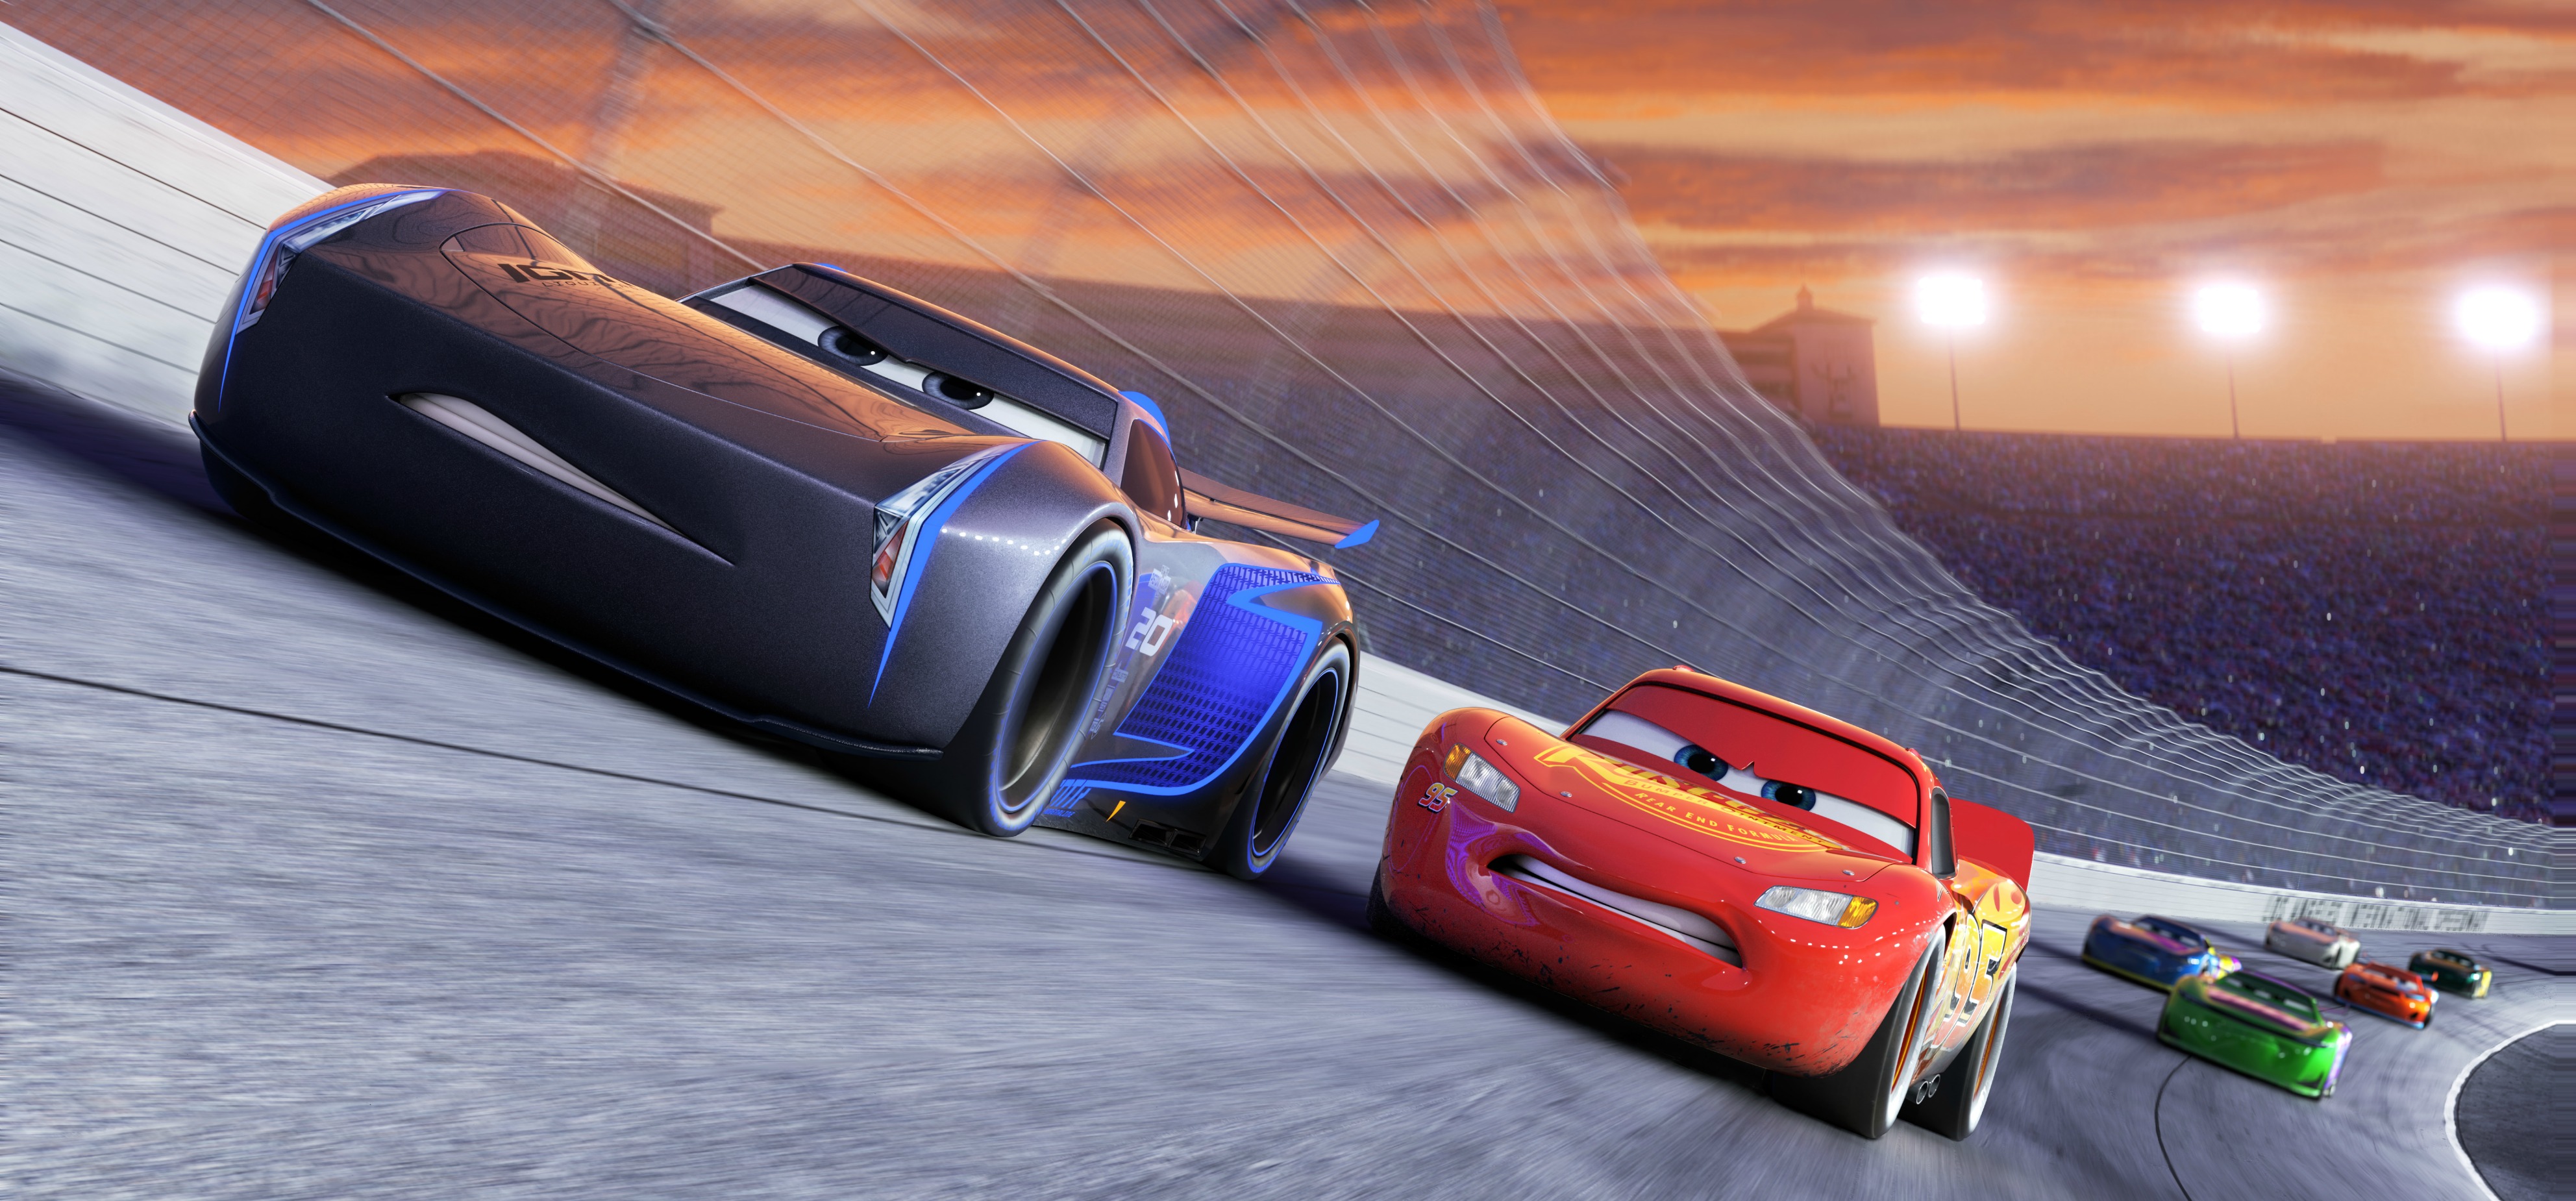 CARS 3 - Activity Sheets + New Trailer Now Available